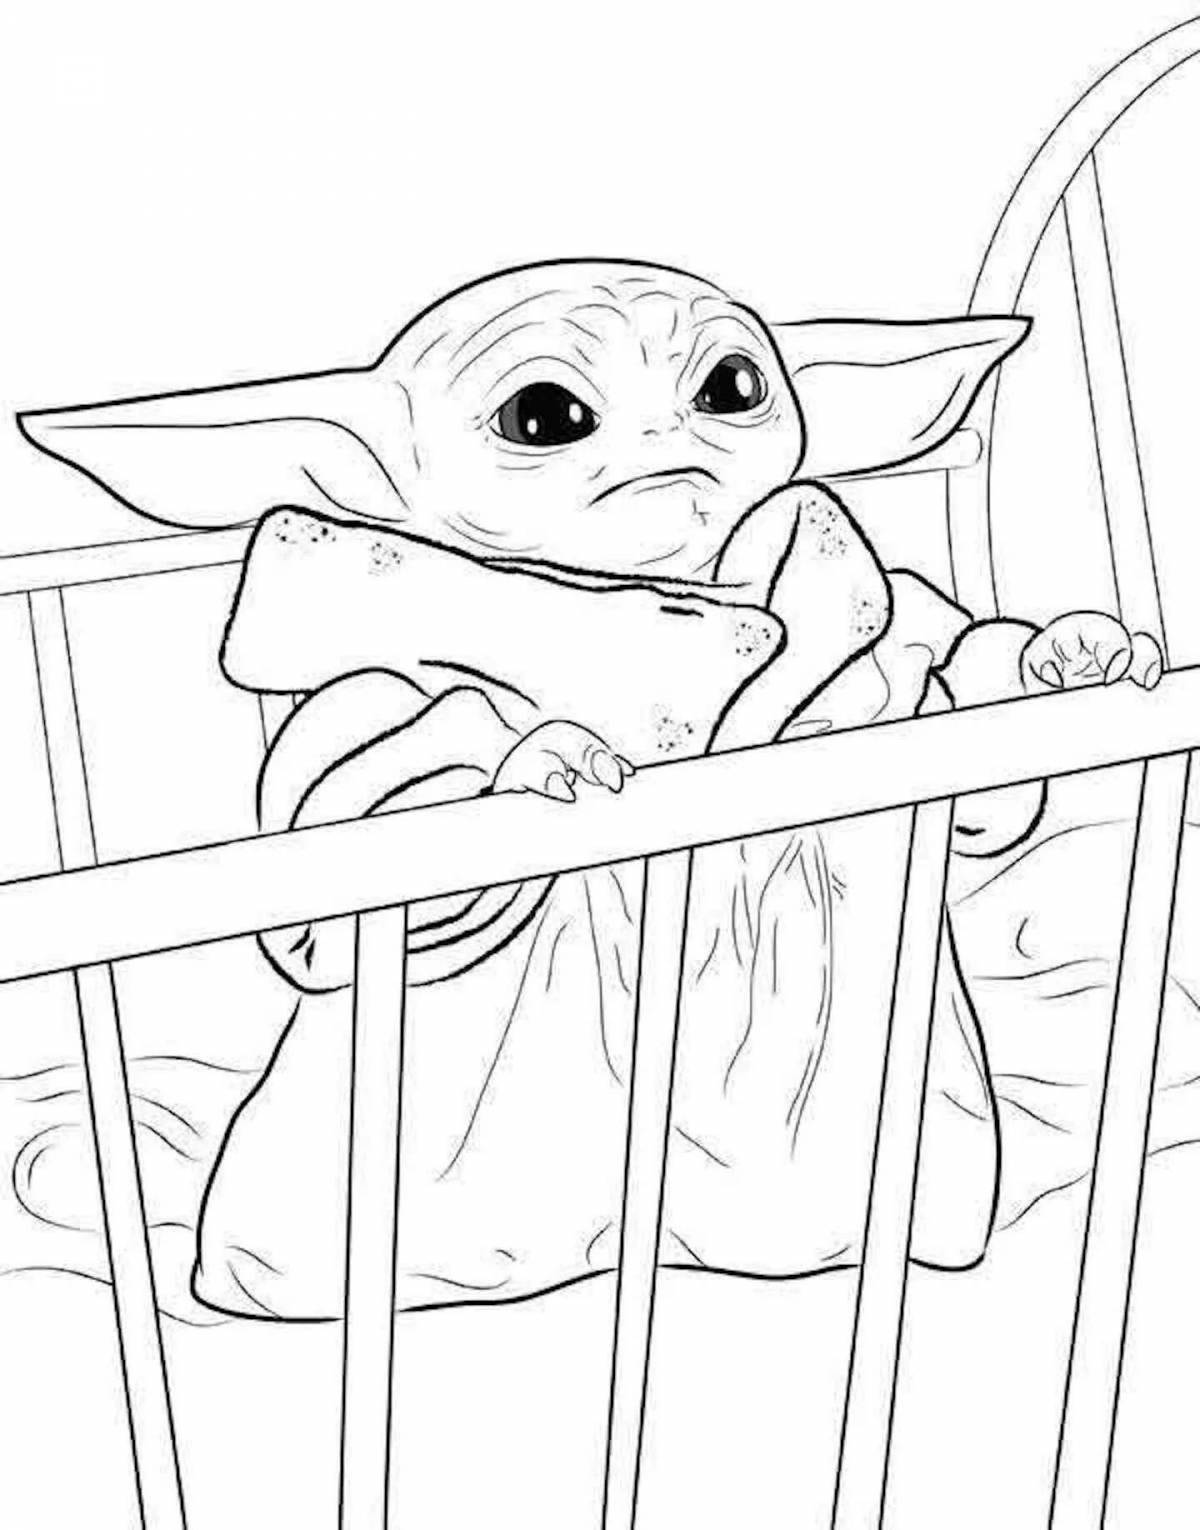 Colorful star wars food coloring page